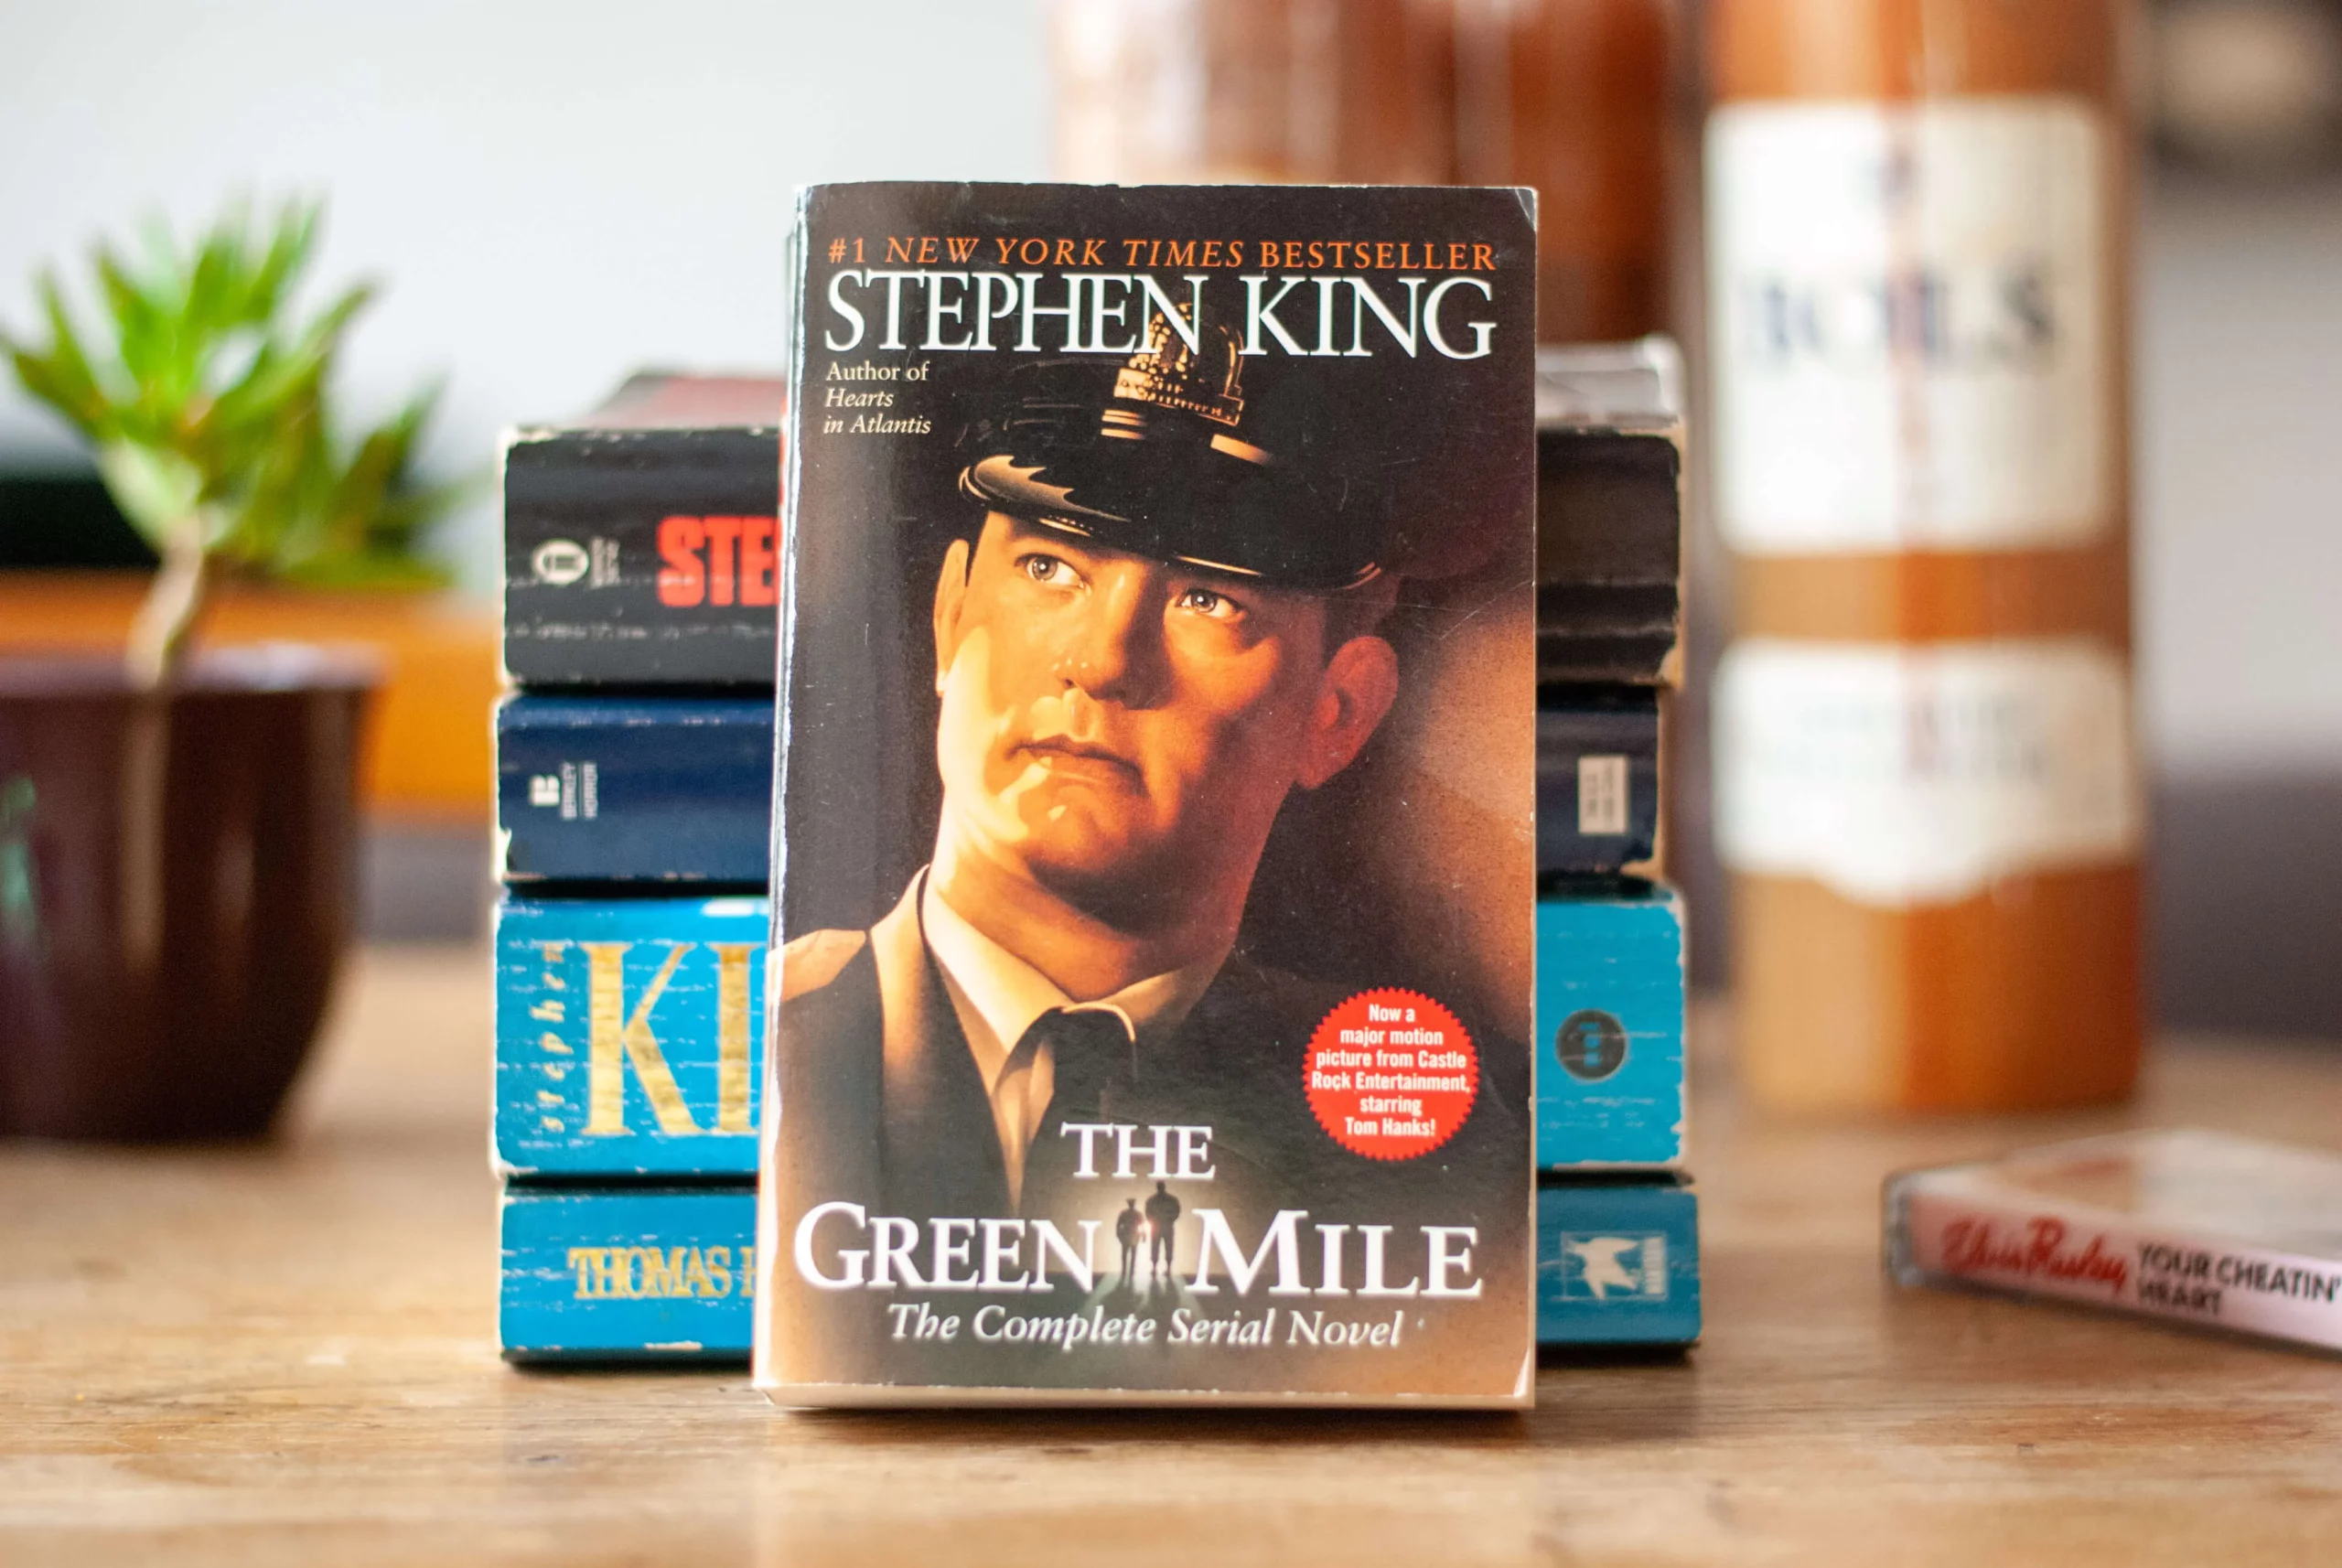 The Green Mile book by Stephen King